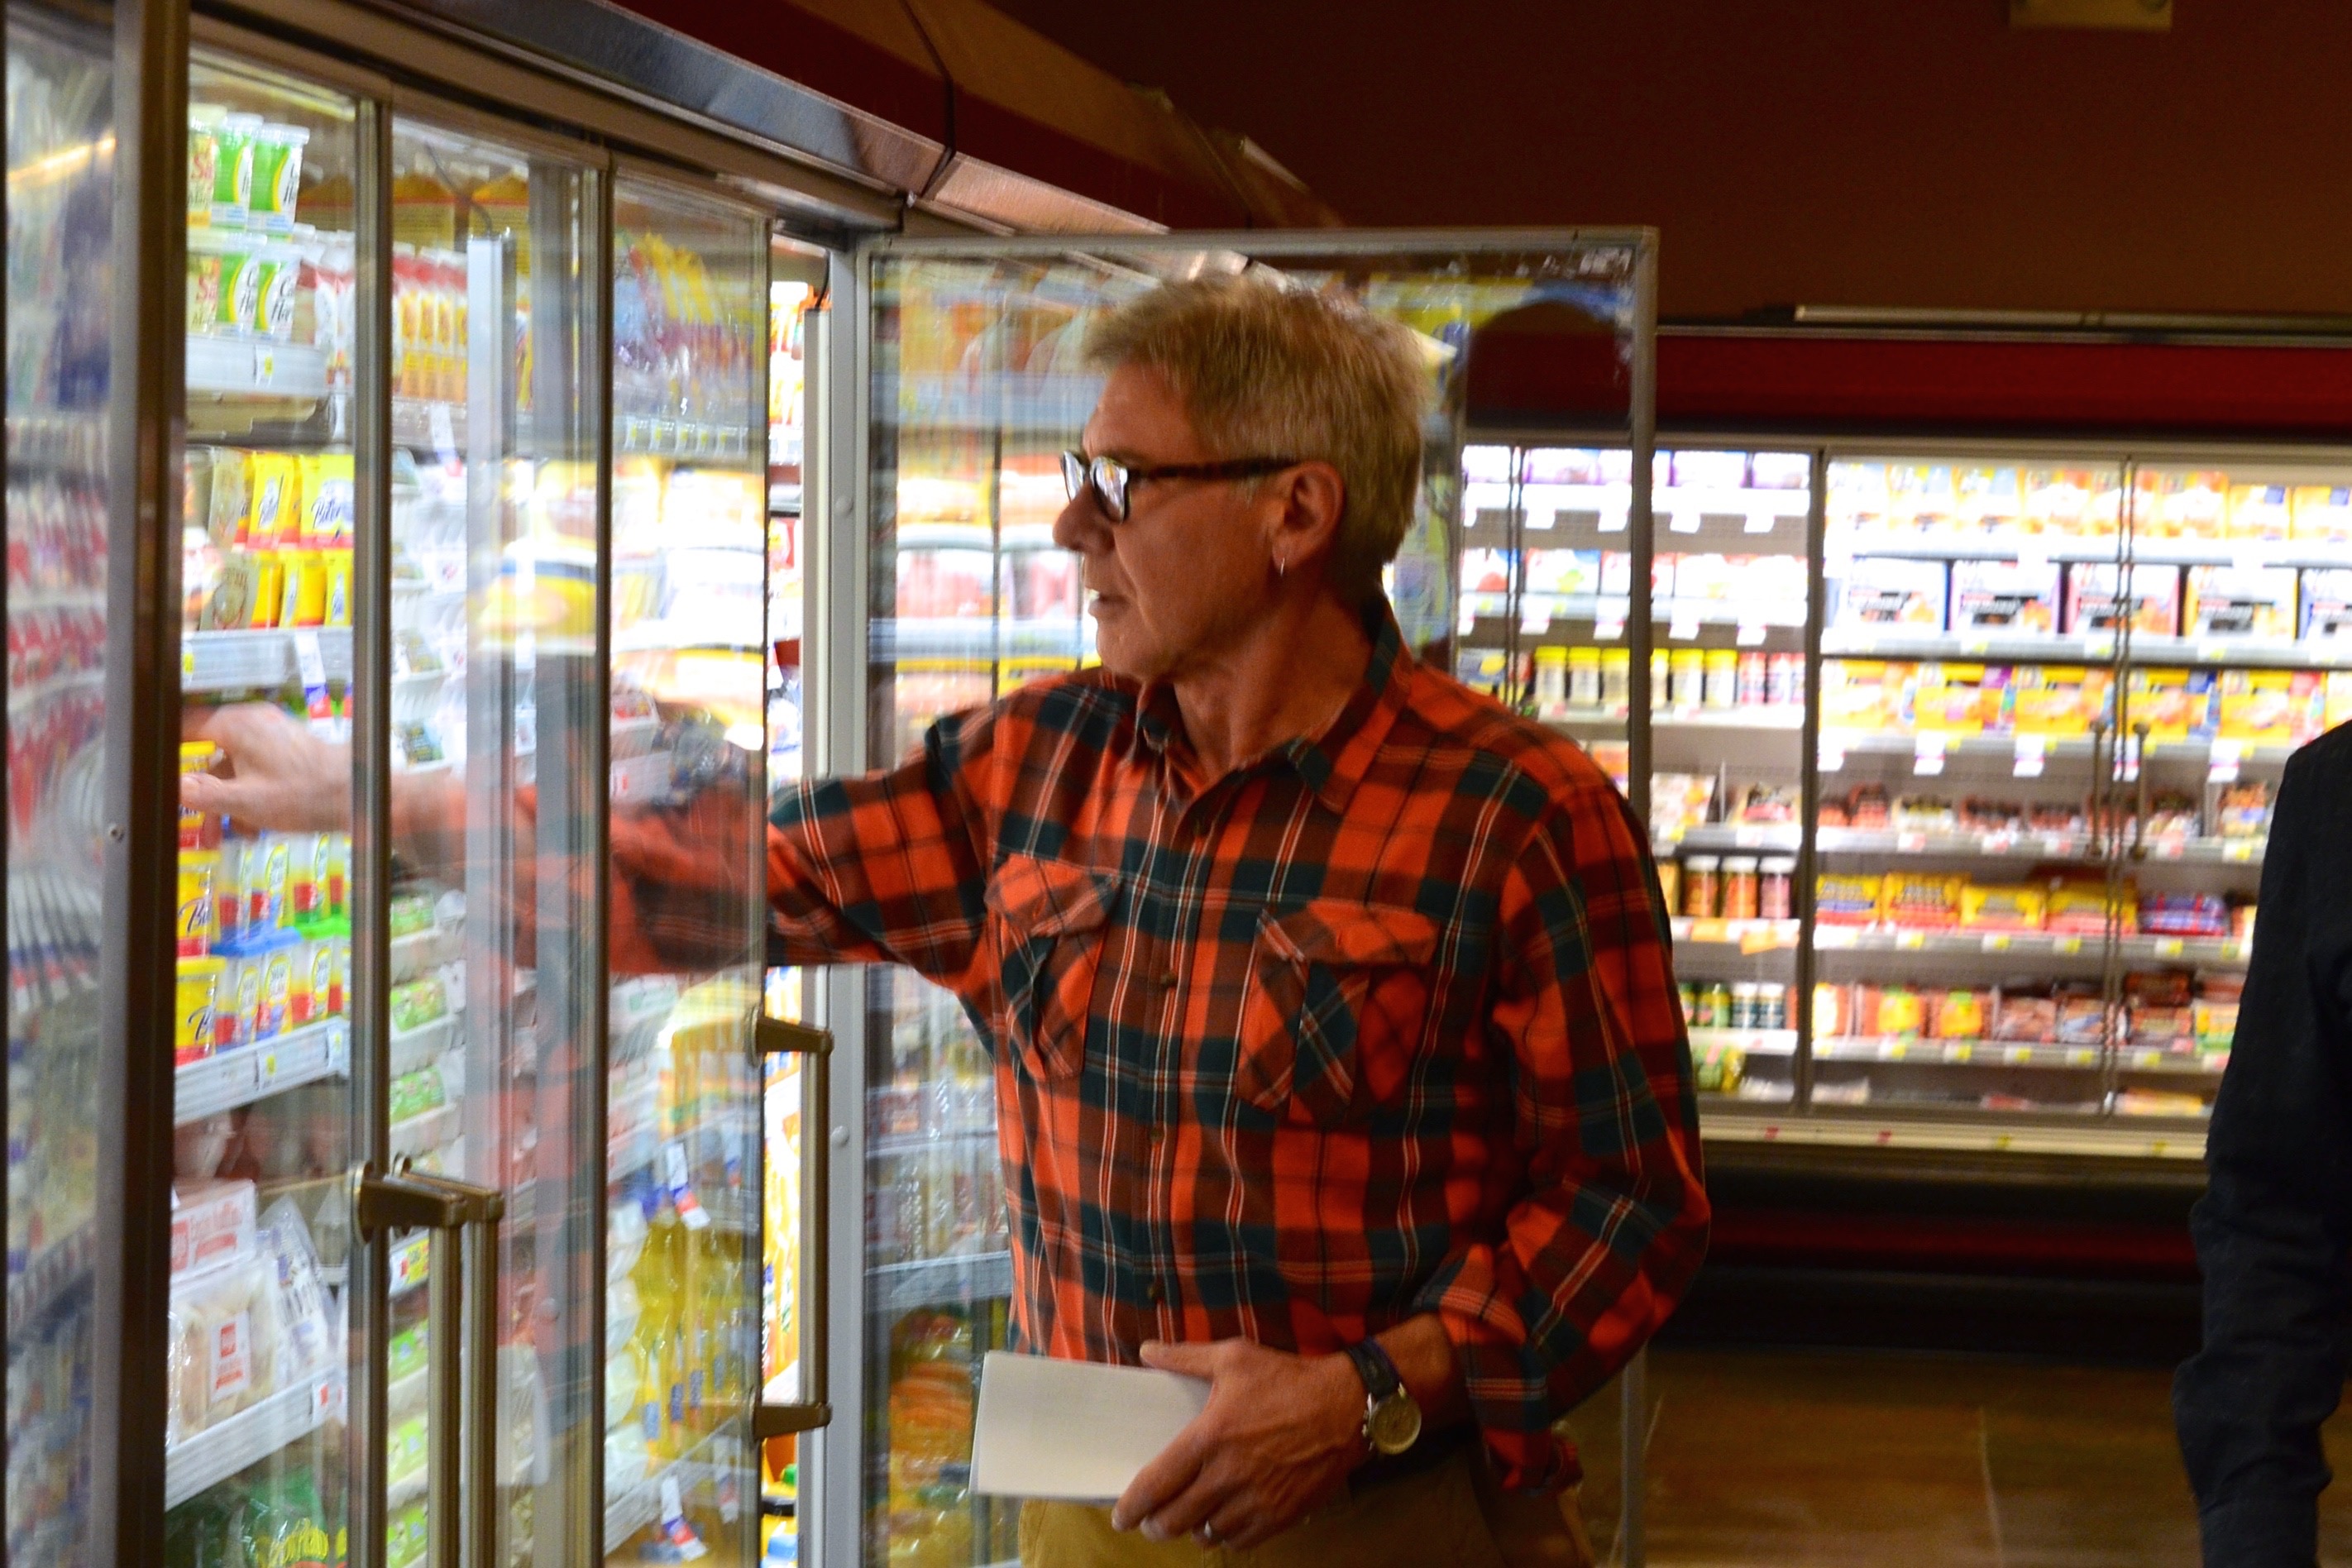 Actor/Conservationist Harrison Ford doing a bit of field research in a local supermarket. (Scene taken from the Showtime Emmy Award wining climate change series “Years of Living Dangerously”. Photograph courtesy of Jeff Horowitz